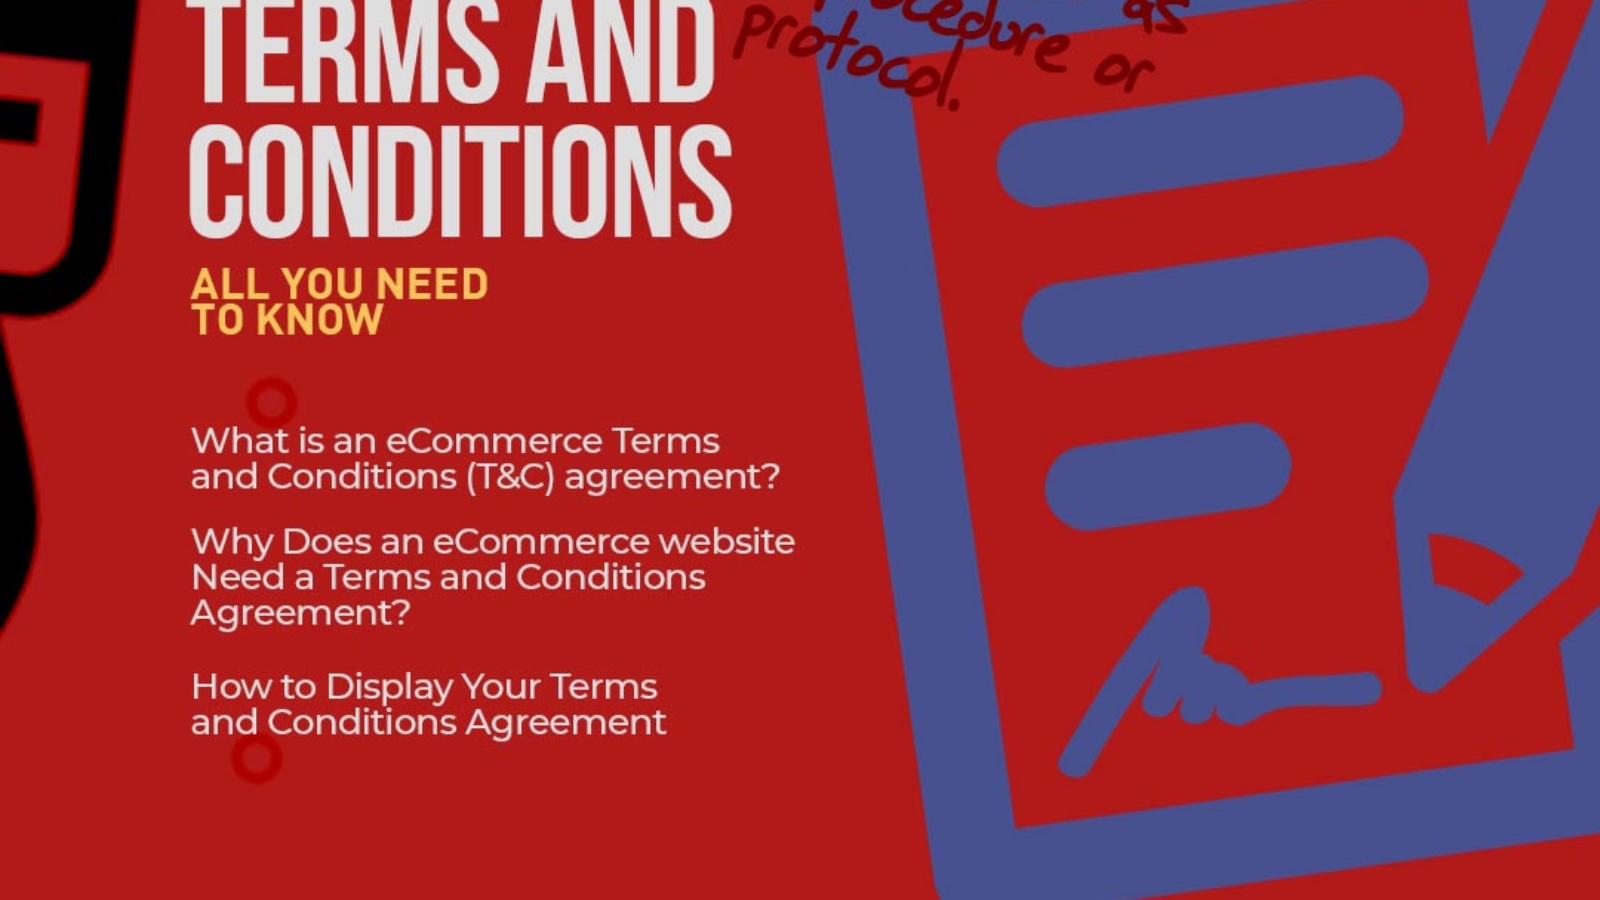 Everything You Need To Know About eCommerce Terms and Conditions